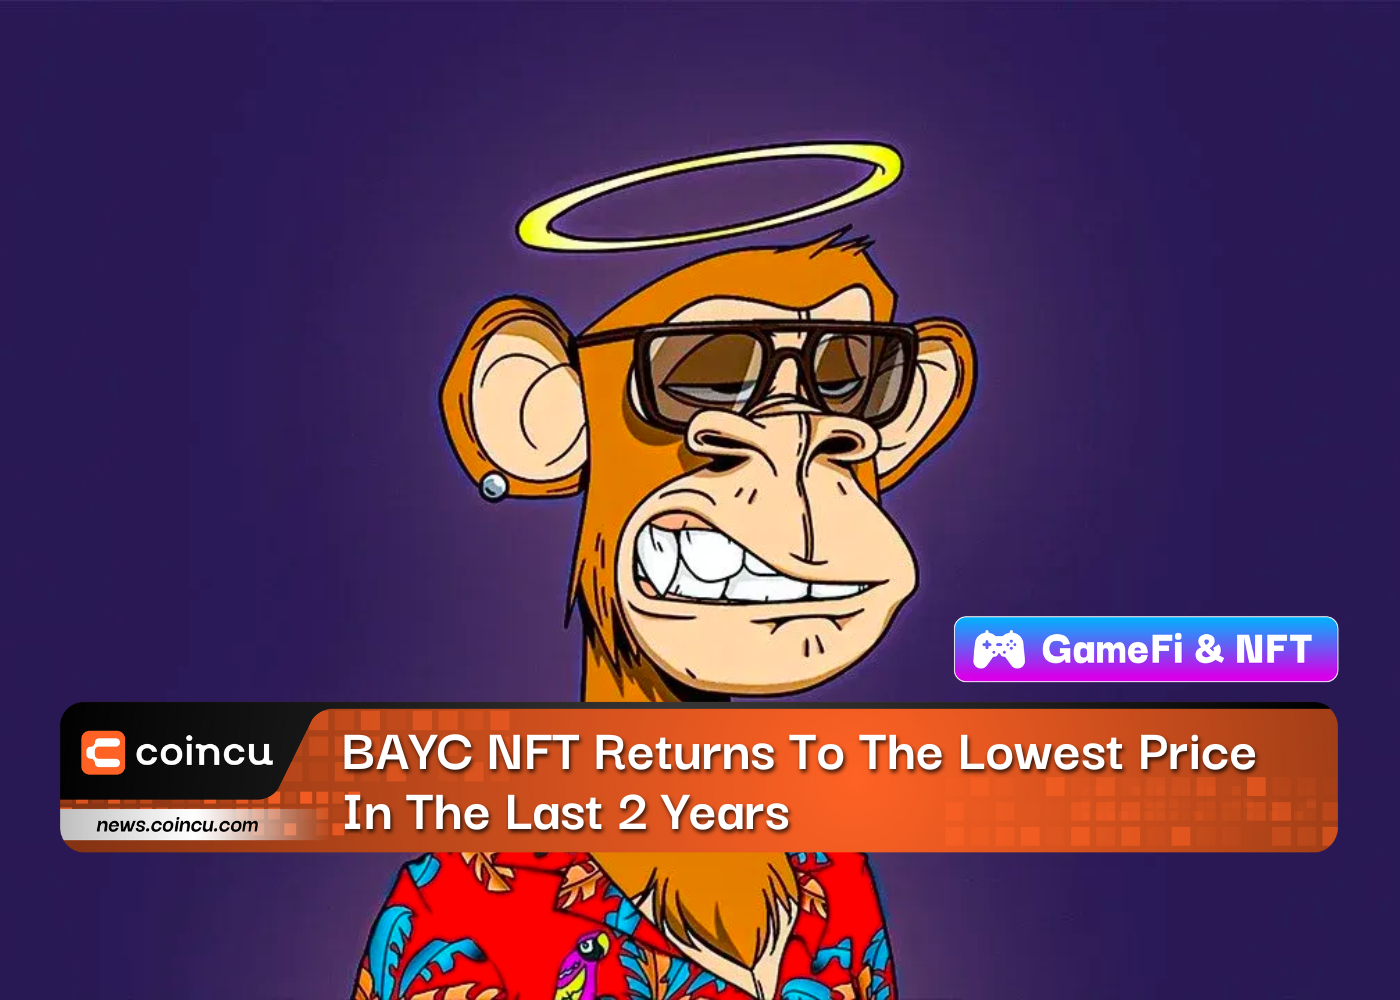 BAYC NFT Returns To The Lowest Price In The Last 2 Years